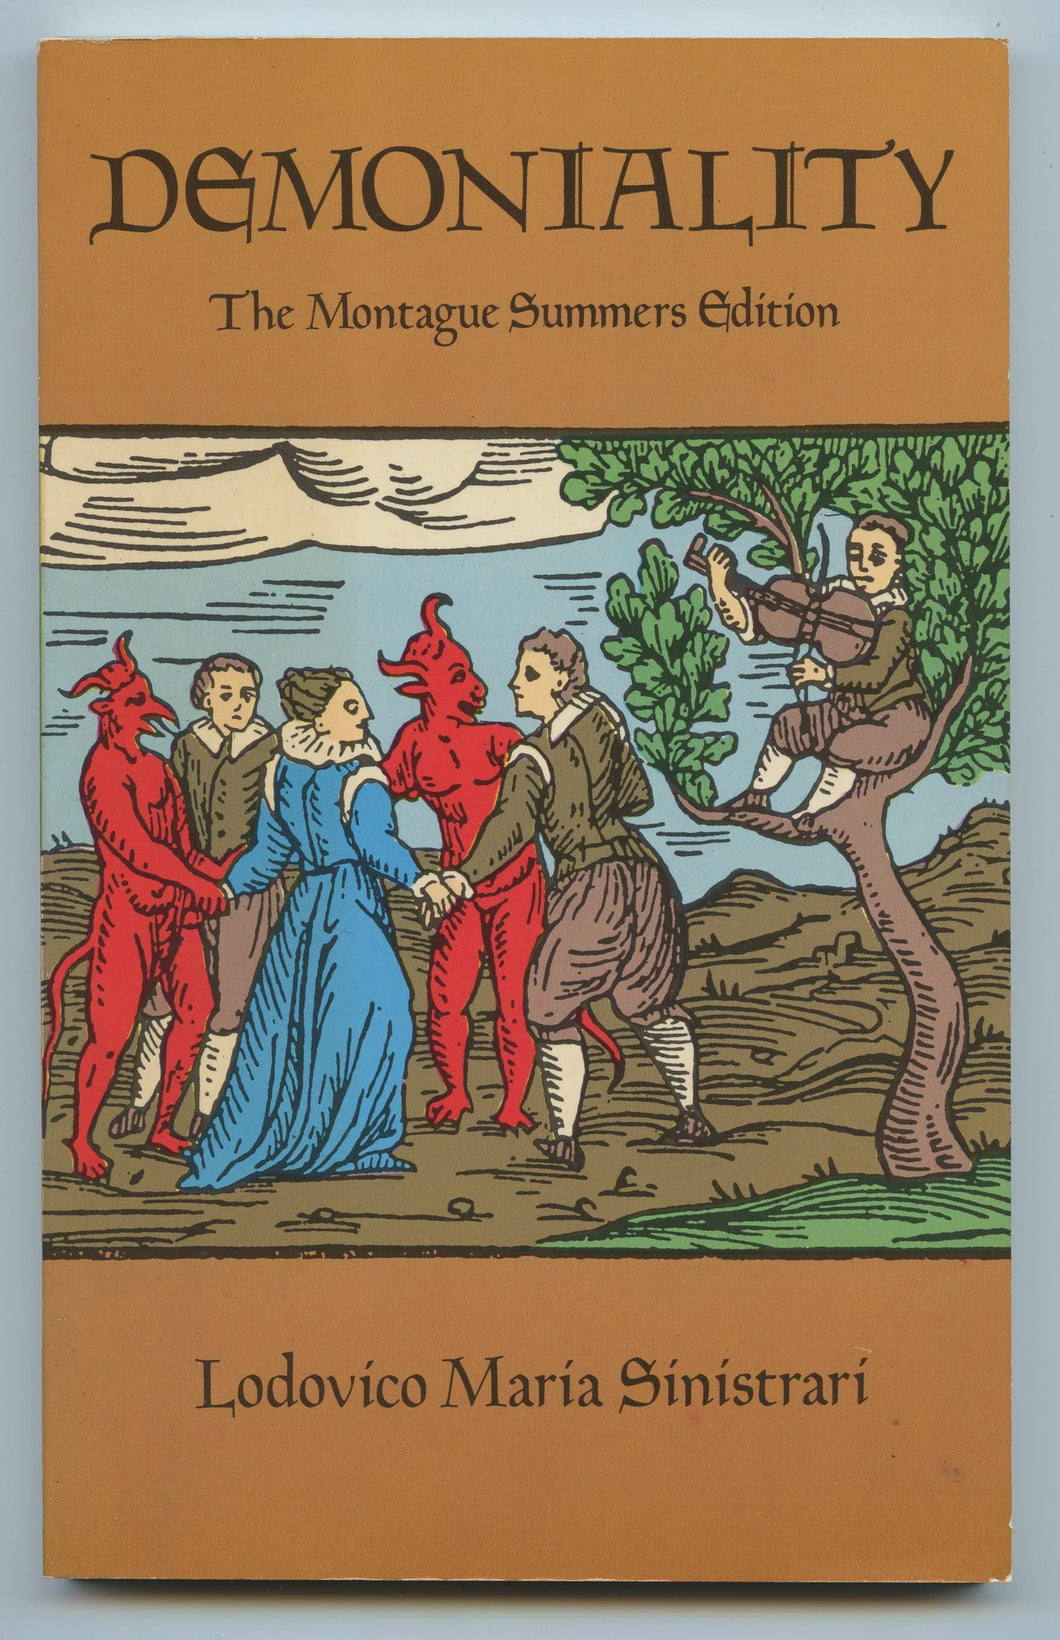 Demoniality: The Montague Summers Edition